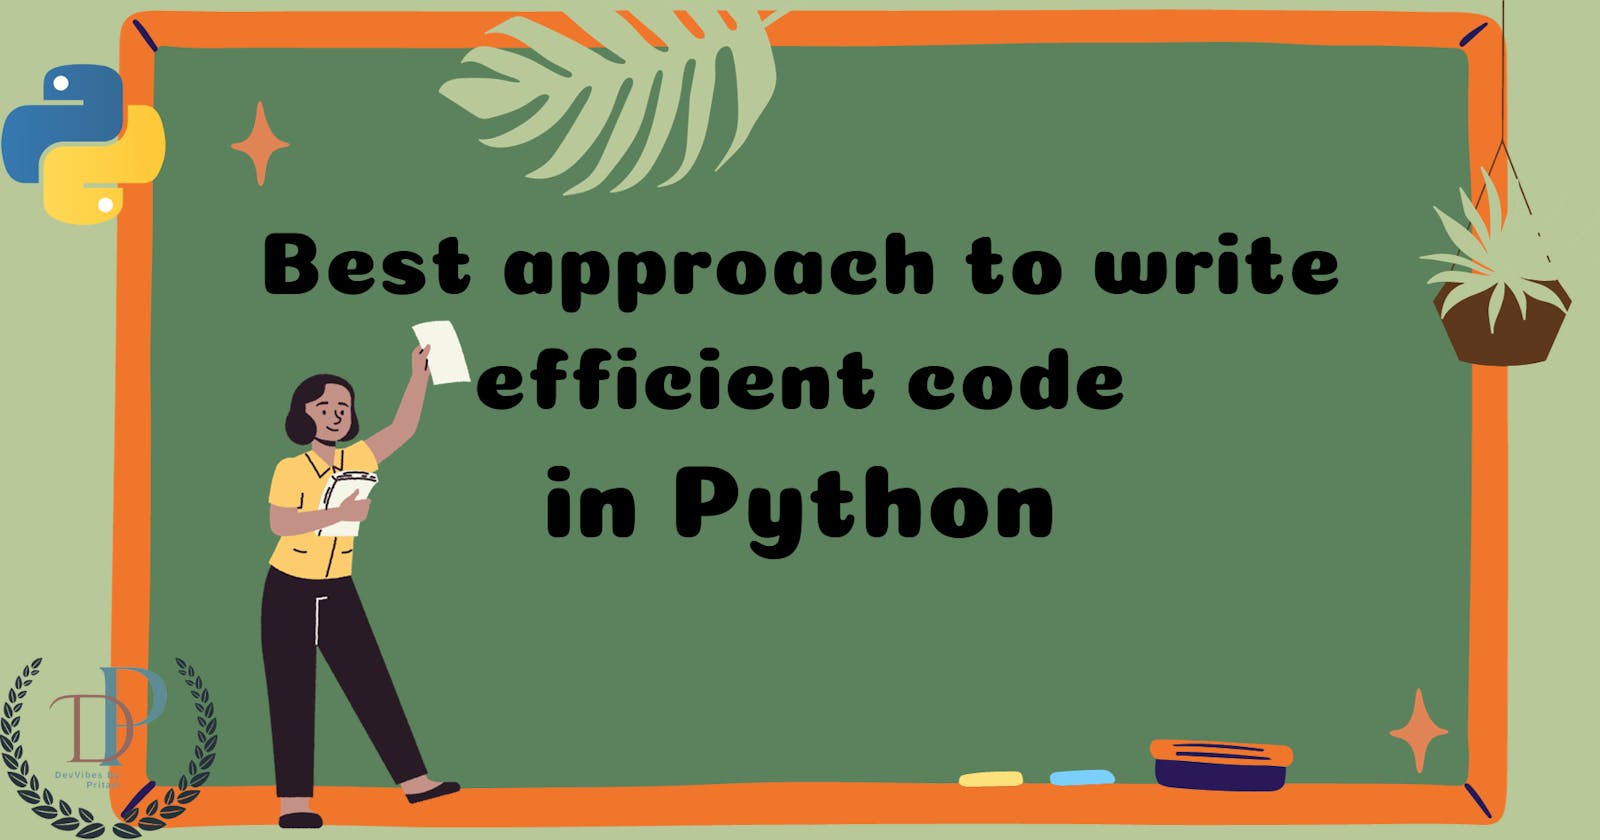 Best approach to write efficient code
in Python